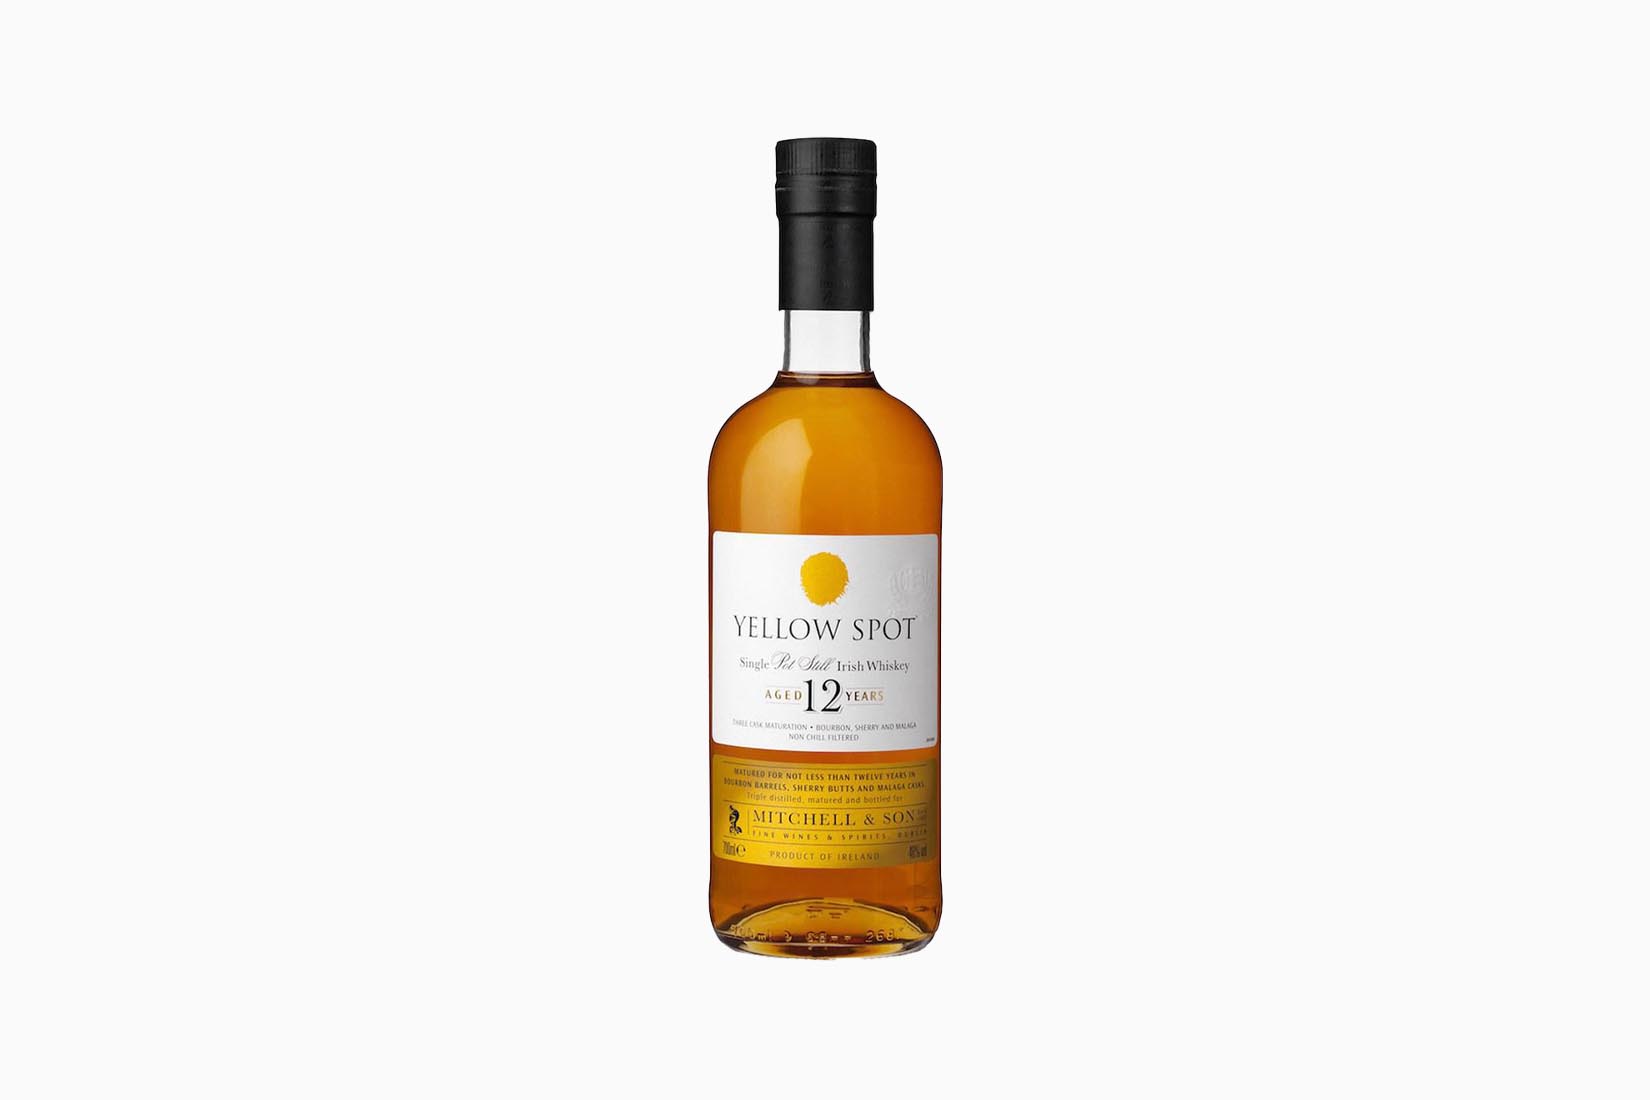 best irish whiskey yellow spot single pot 12 year old review Luxe Digital